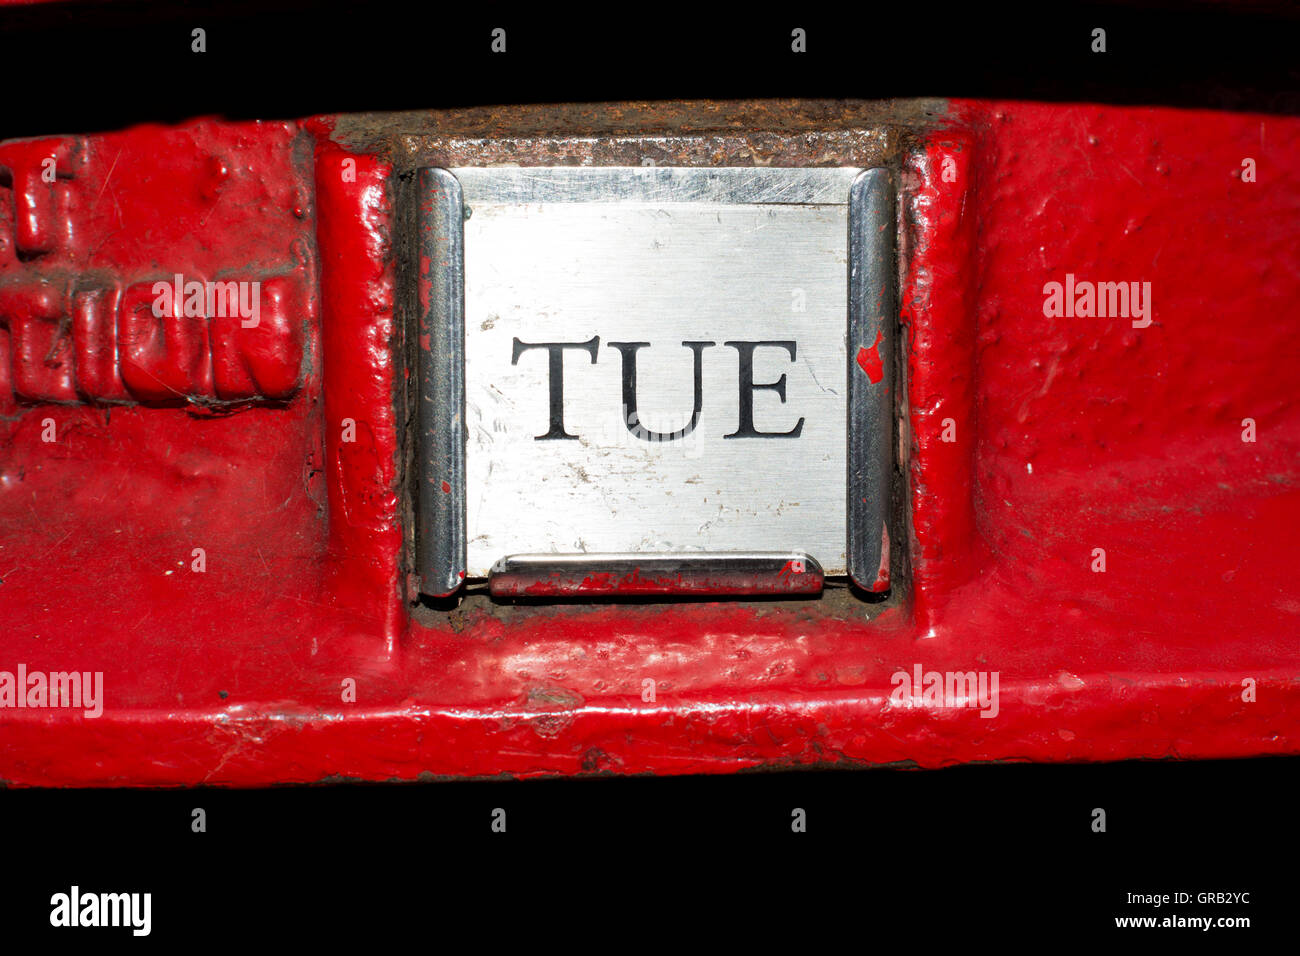 Tuesday next collection plate on red post box, UK Stock Photo